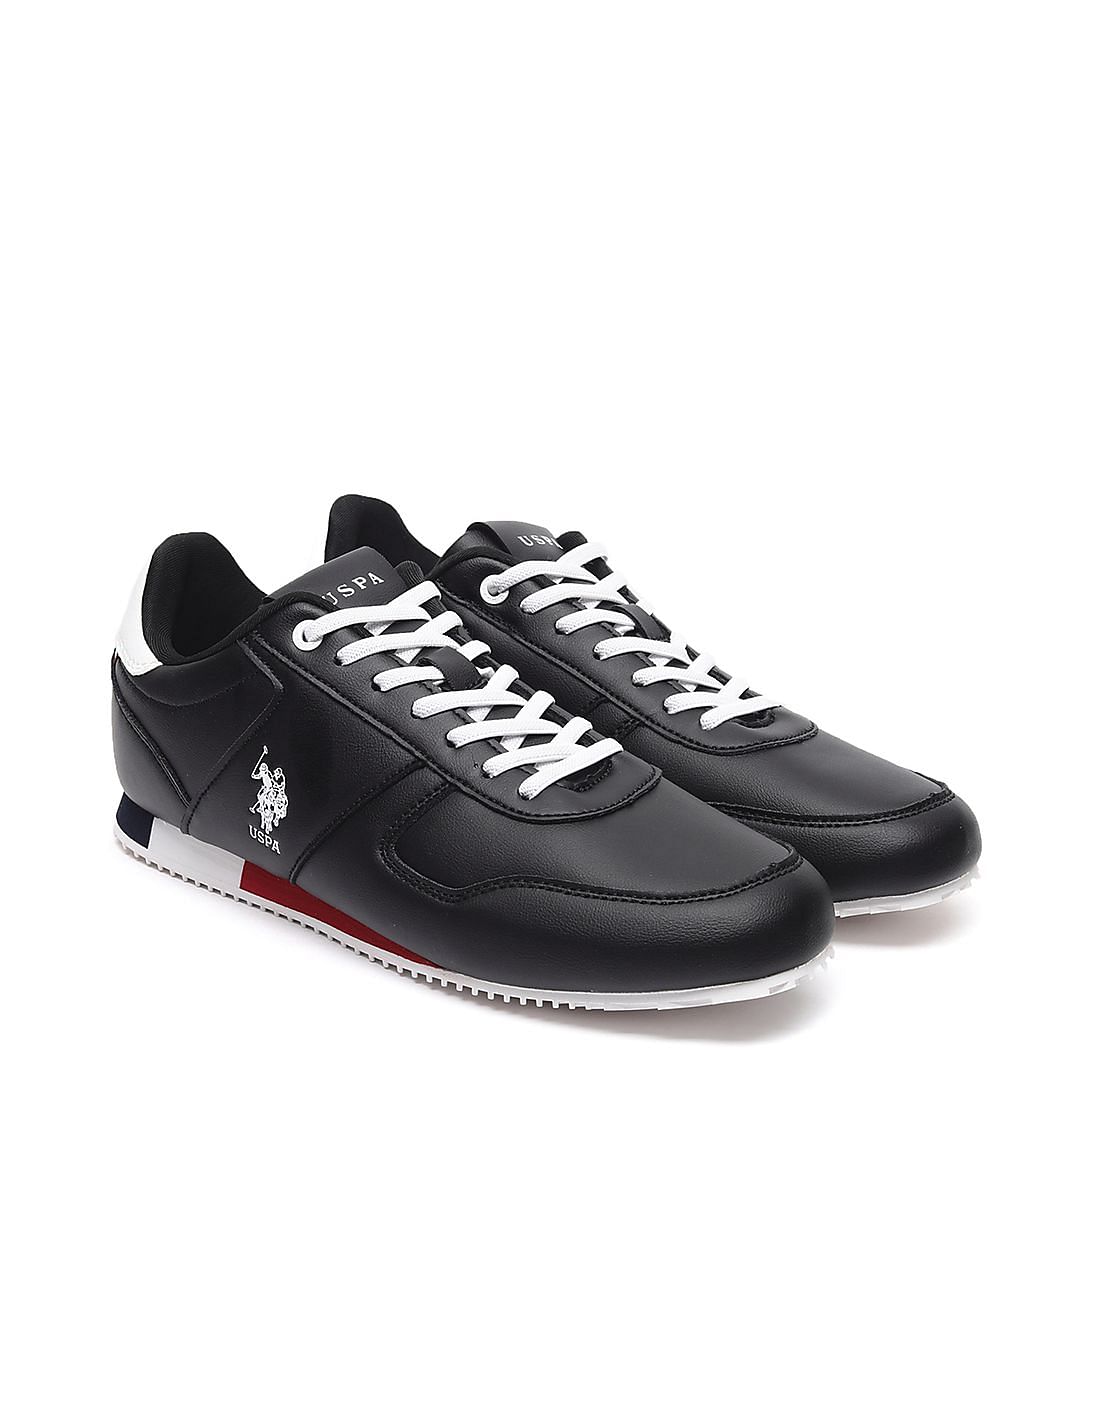 Buy U.S. Polo Assn. Men Black Lace Up Sorrento 2.0 Sneakers - NNNOW.com